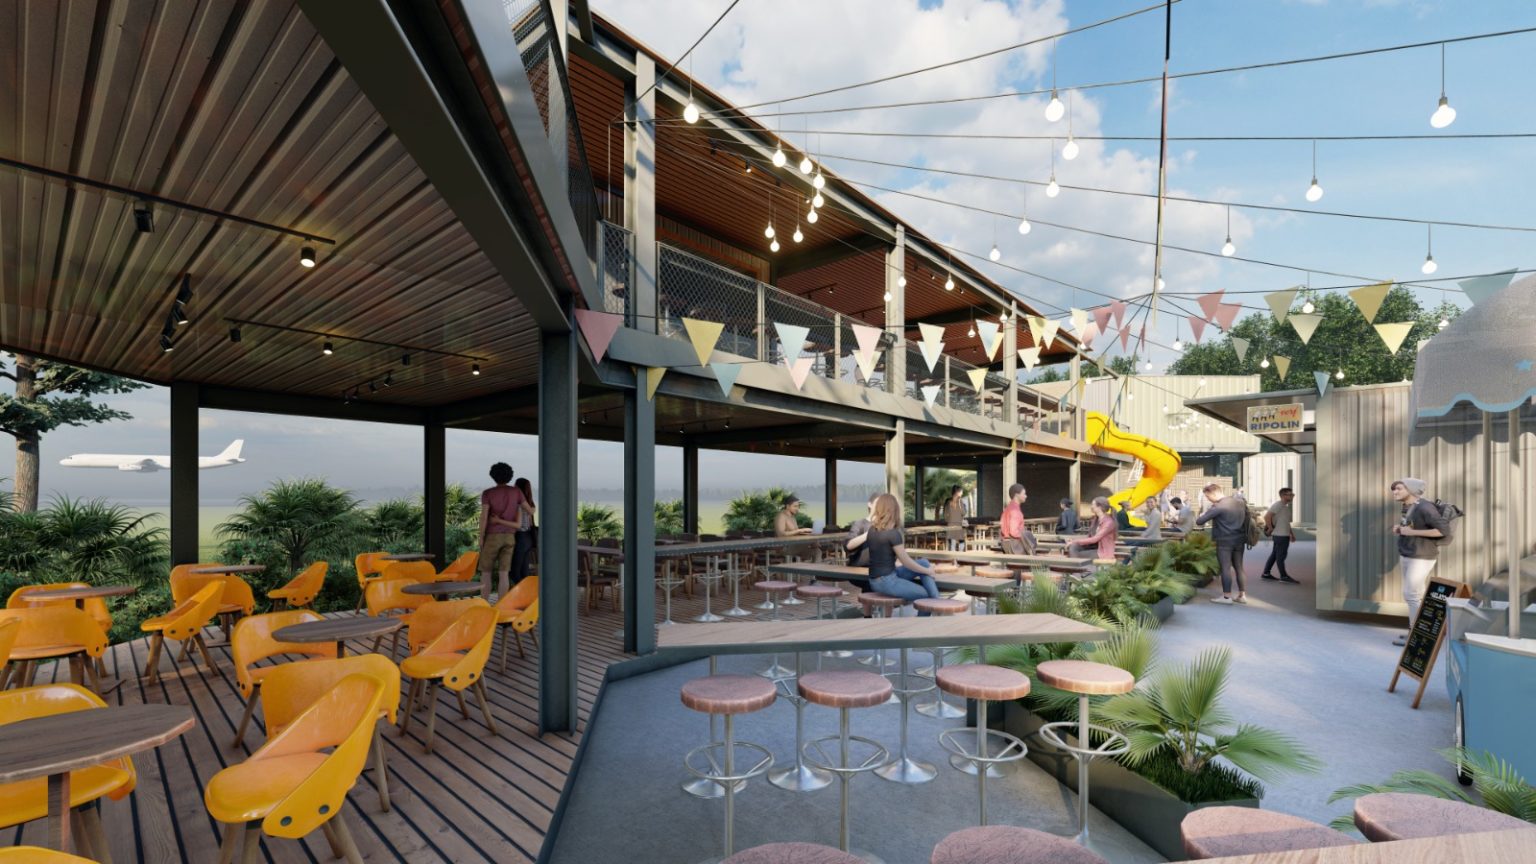 Container Park Near Changi Airport Has Al Fresco Dining & Outdoor Stage ...